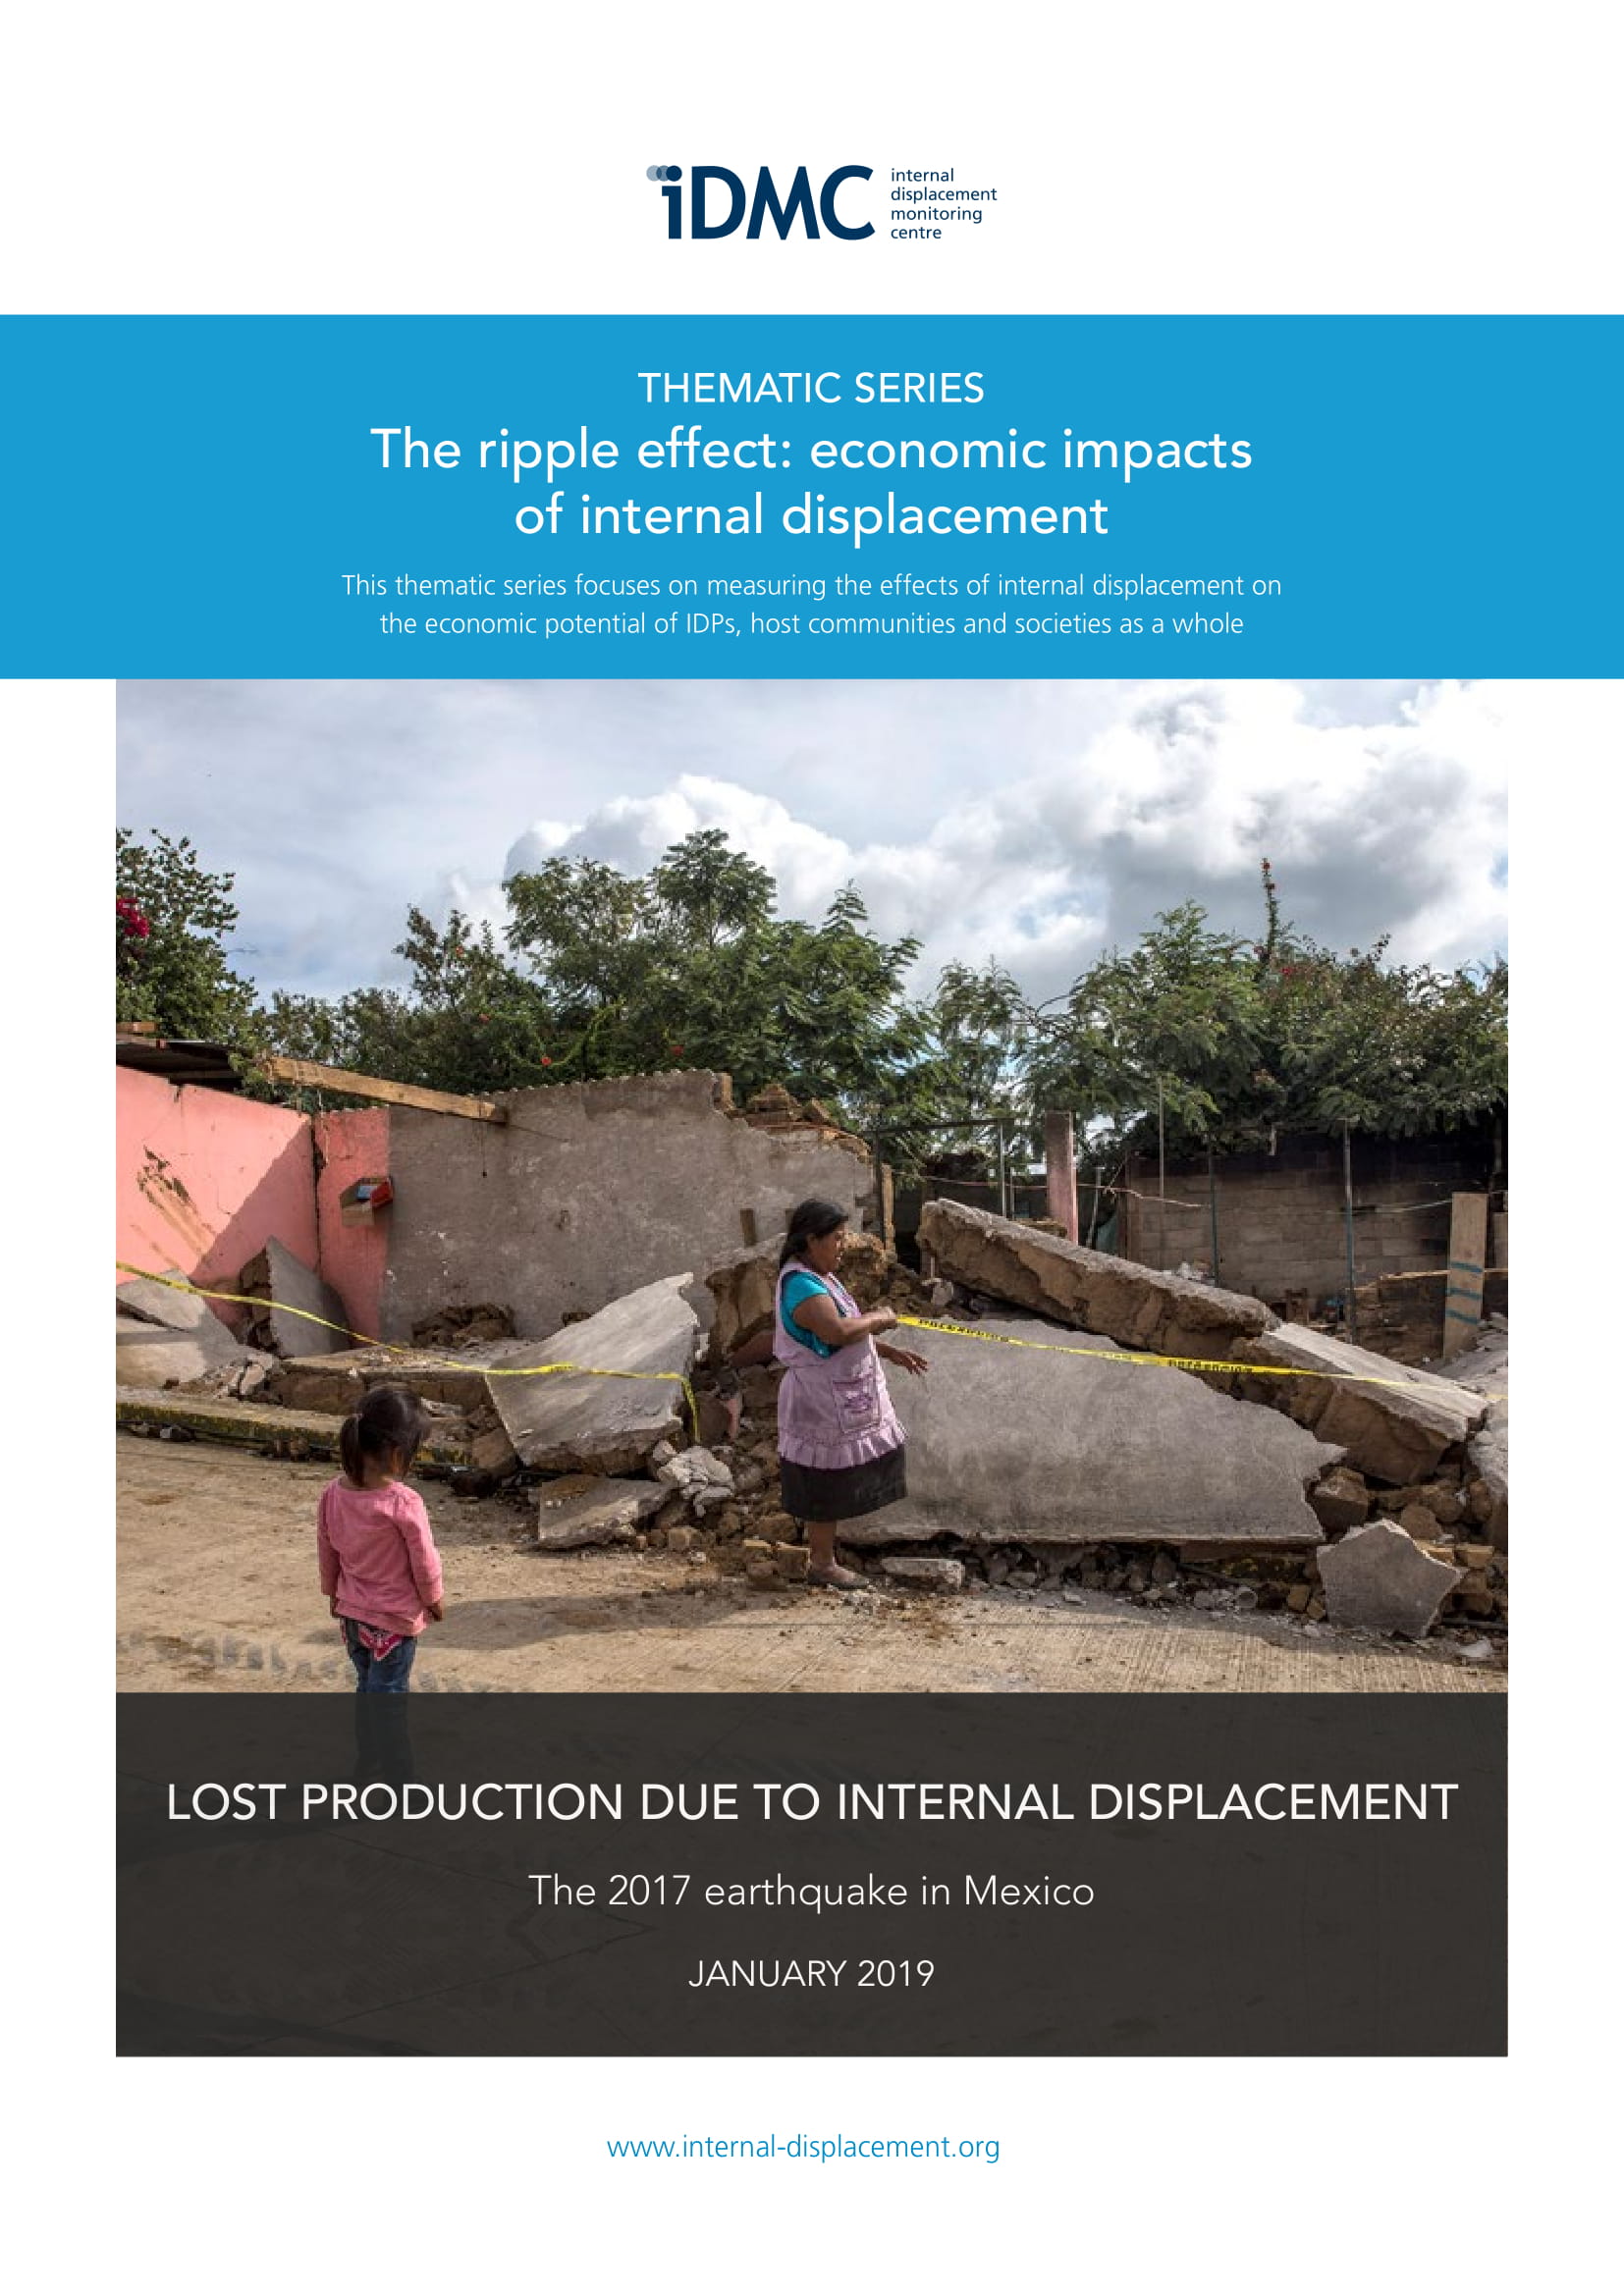 Lost production due to internal displacement - The 2017 earthquake in Mexico 